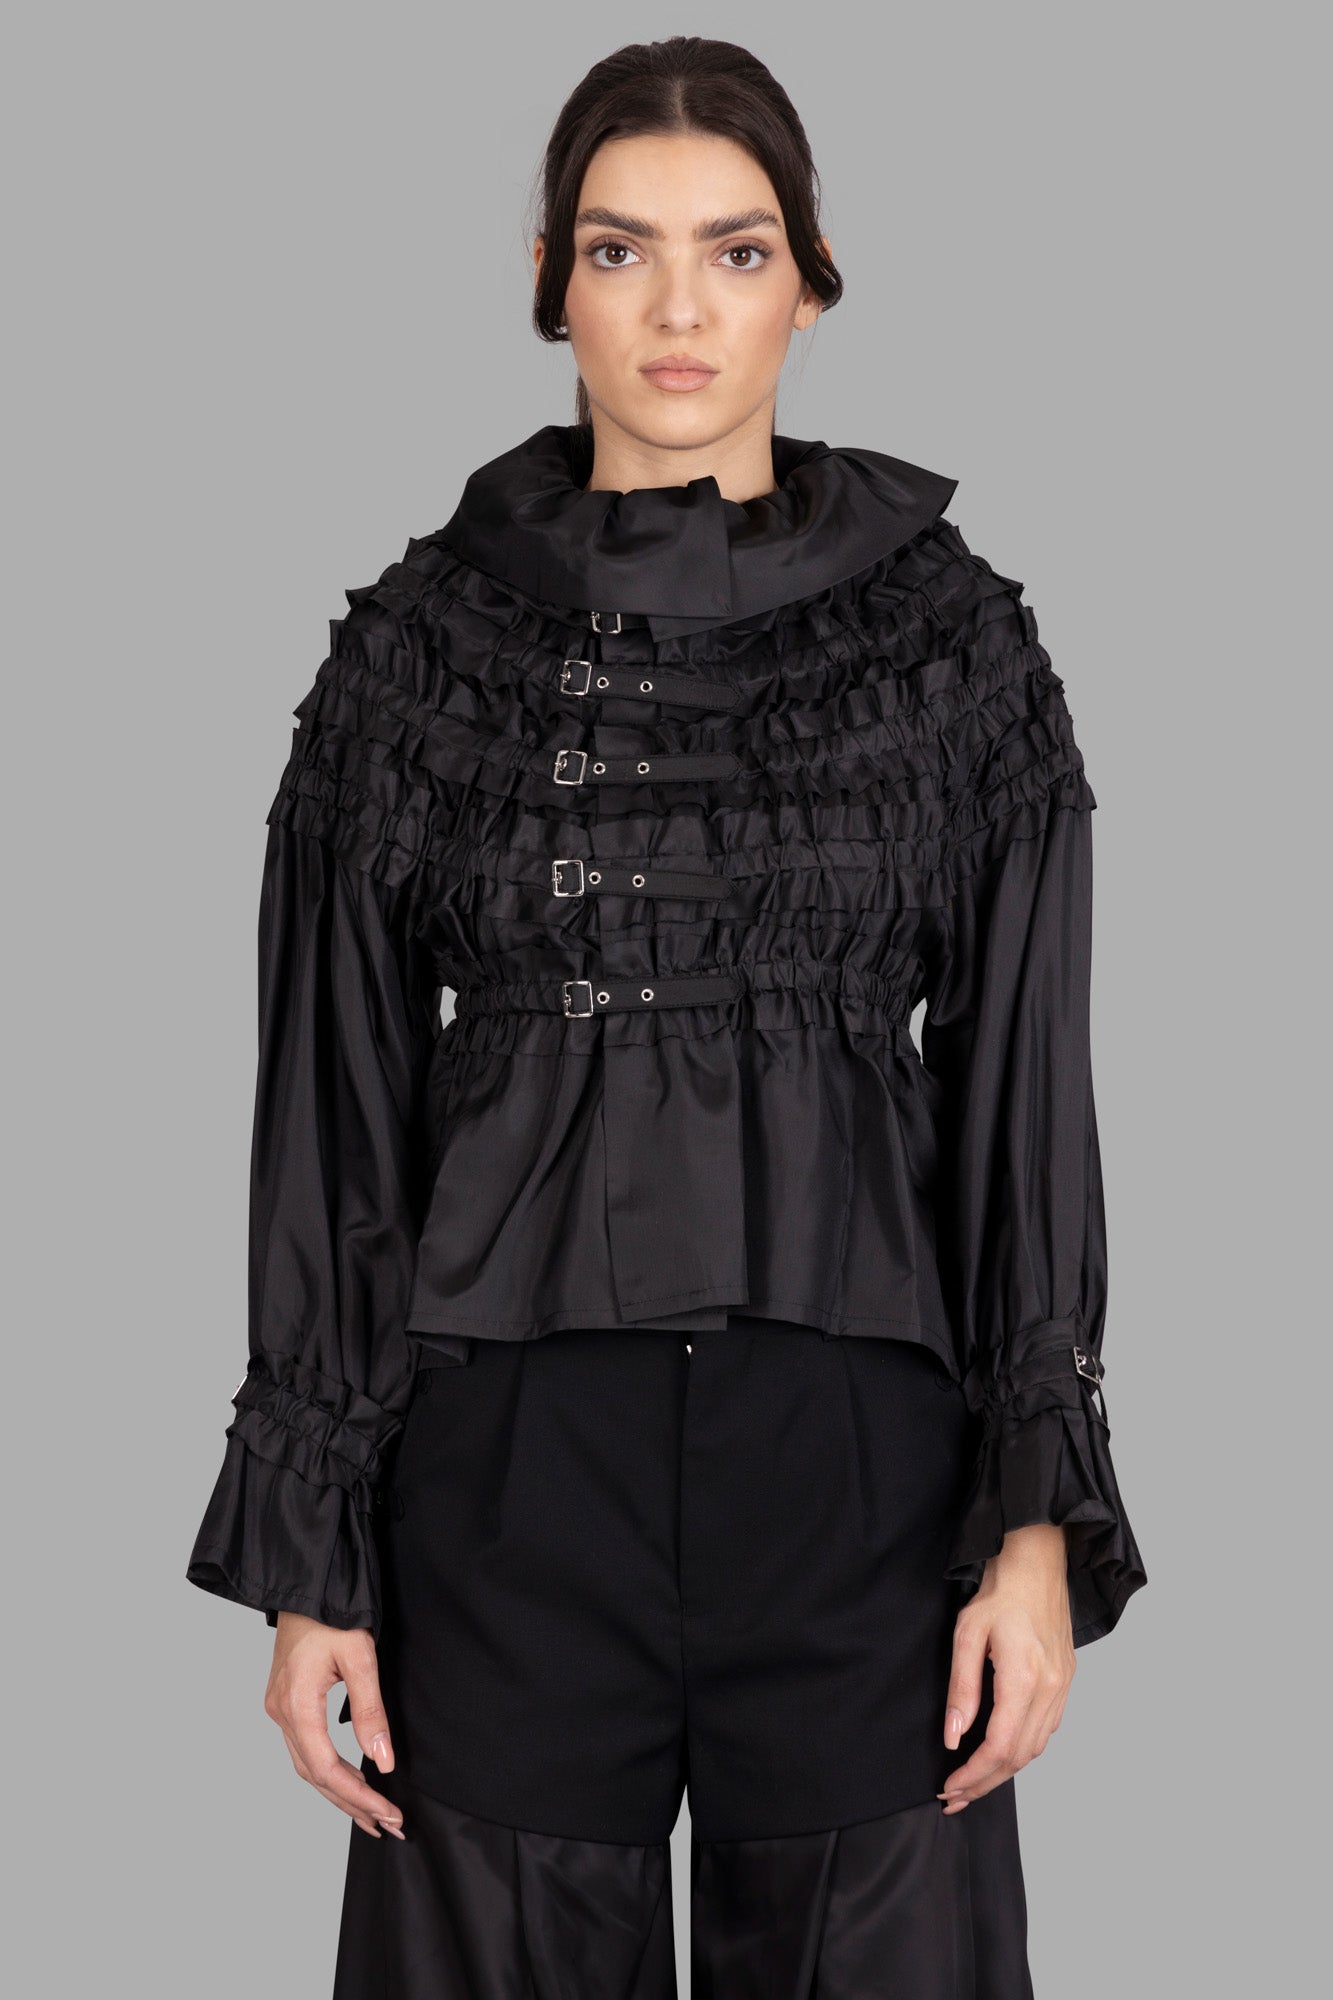 Buckled Ruffled Blouse